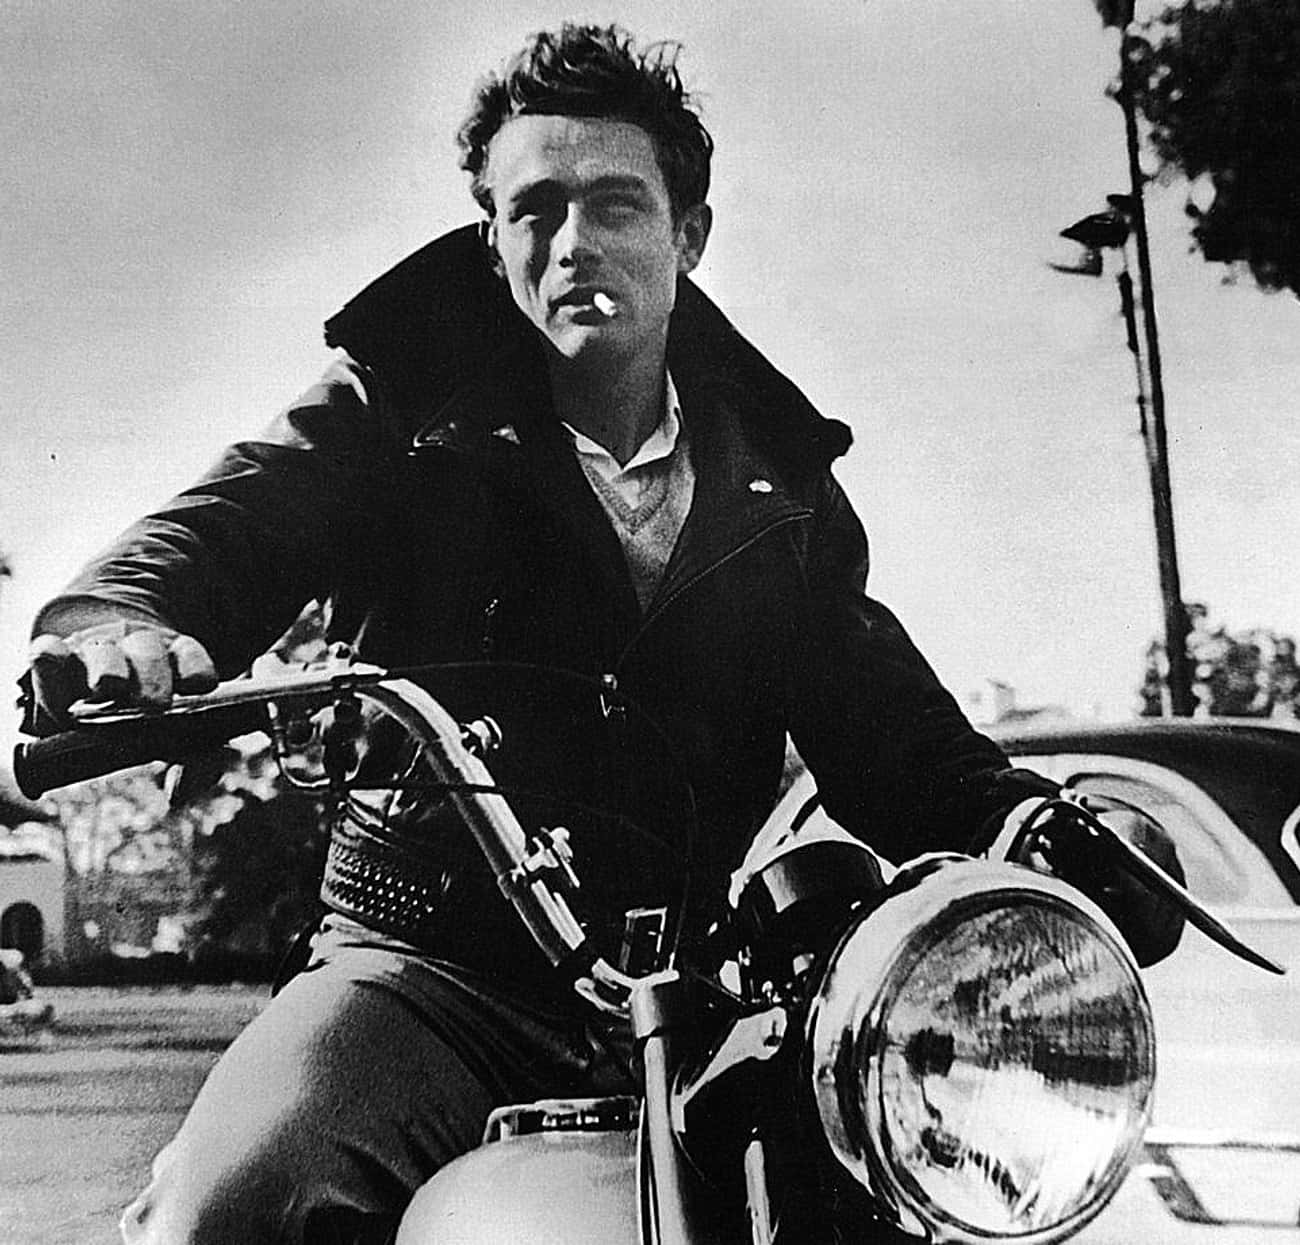 James Dean Was Allegedly Intimate With Men And Women